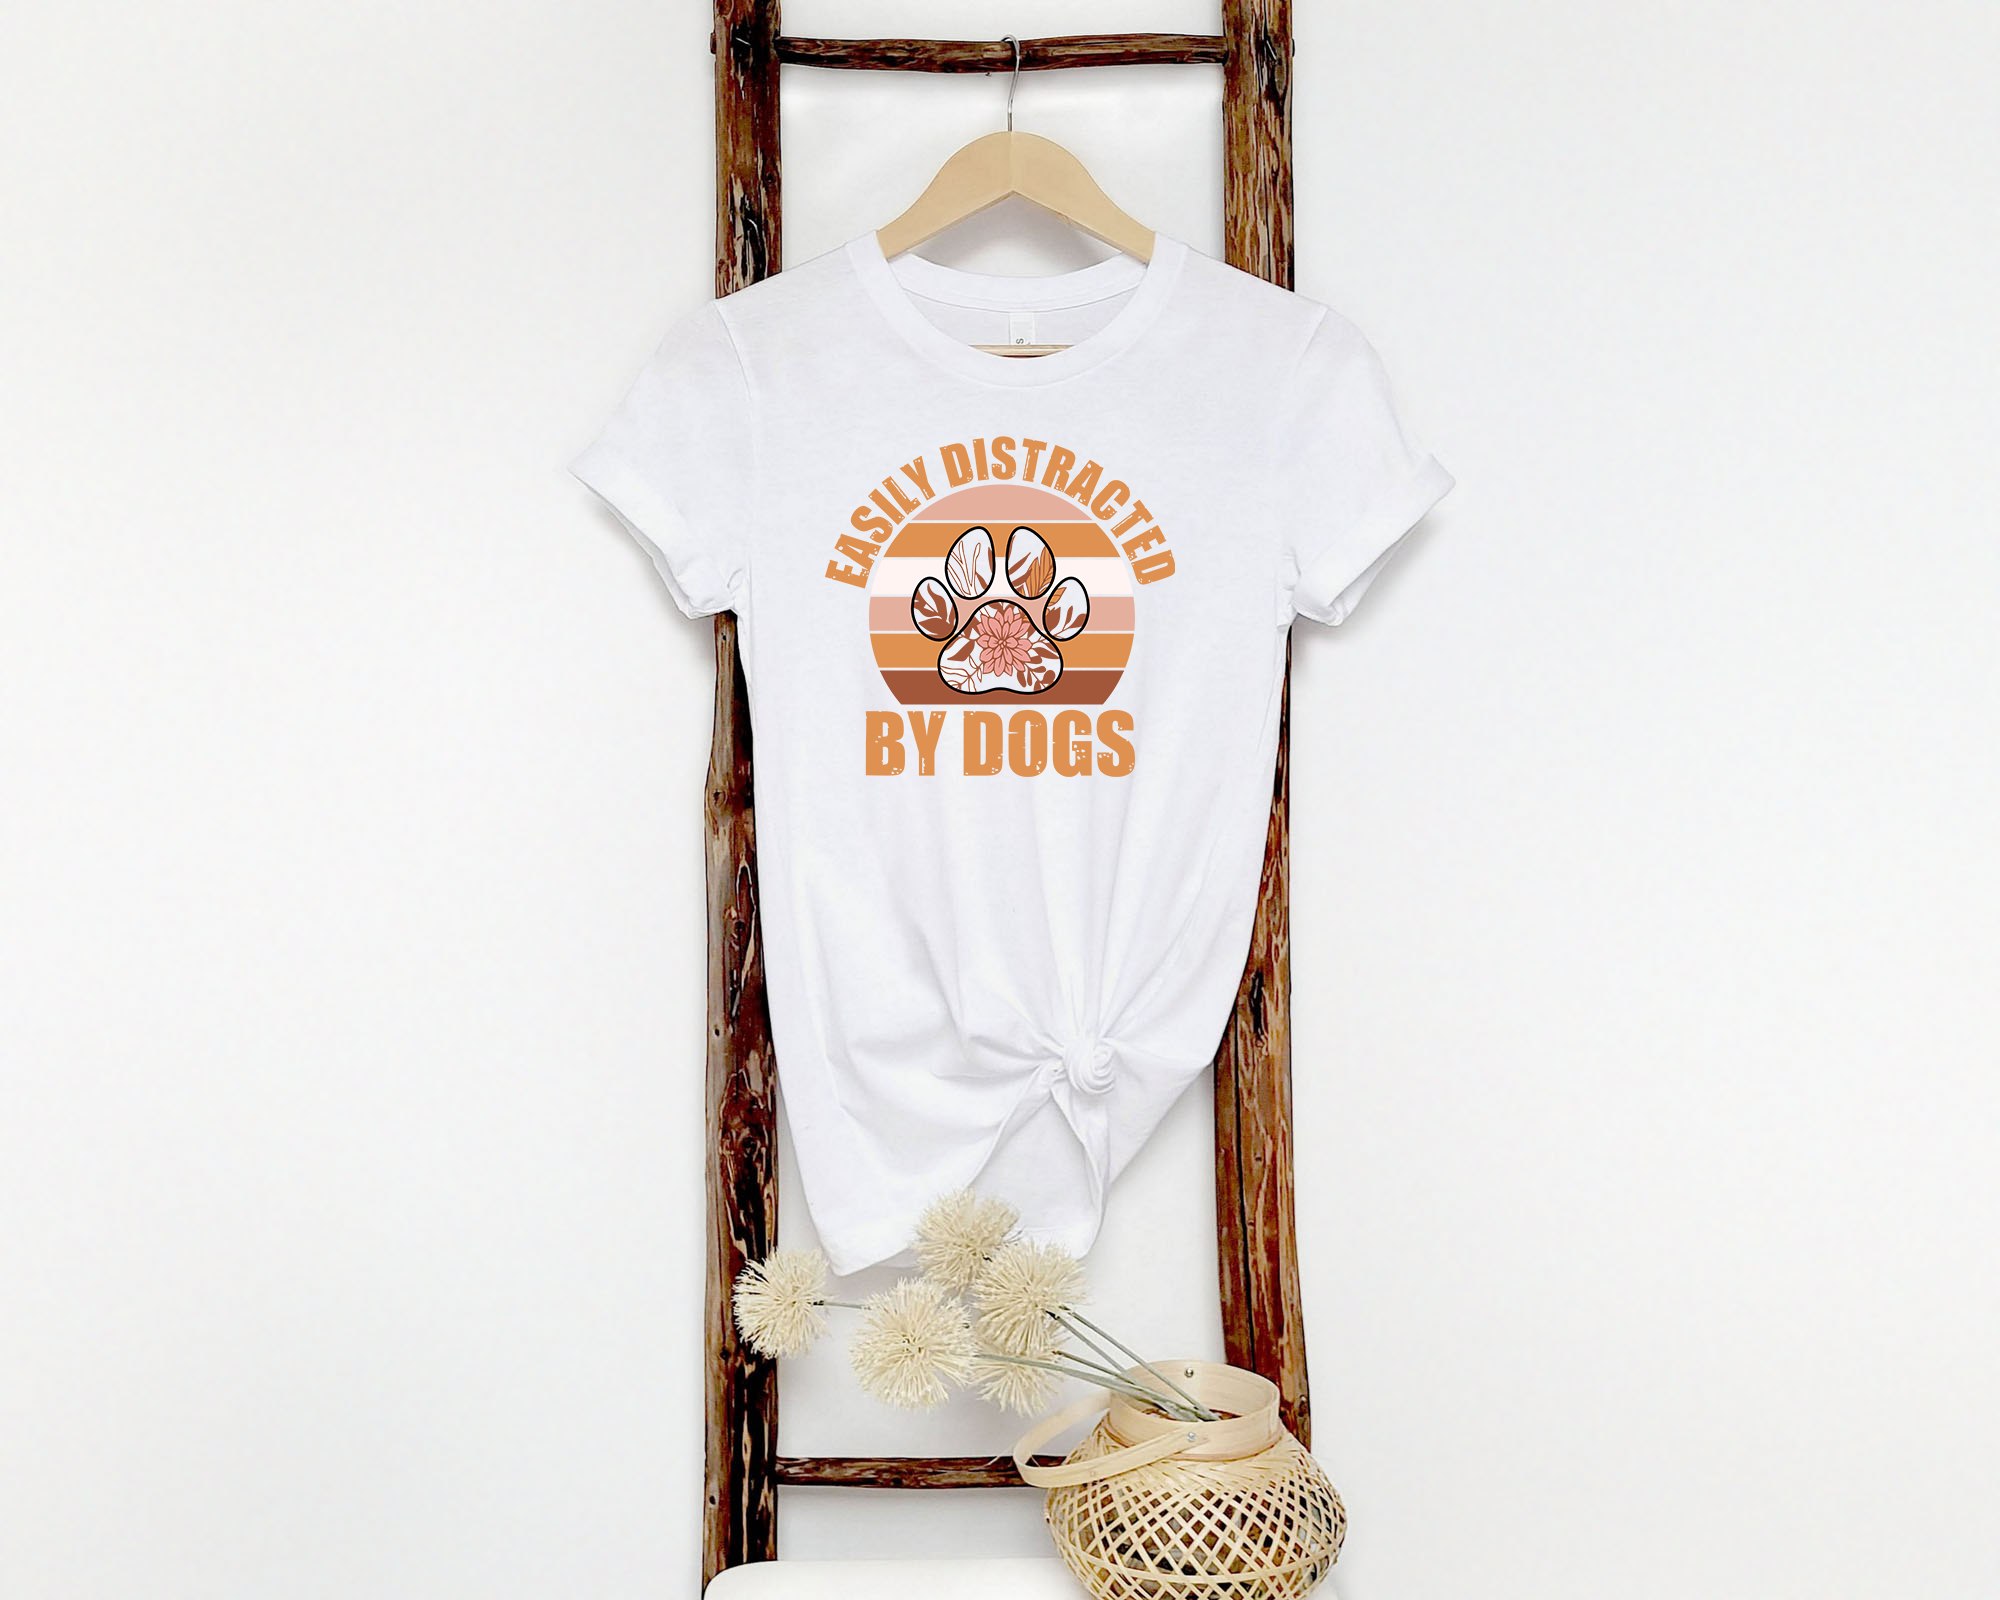 Easily Distracted By Dogs T-shirt